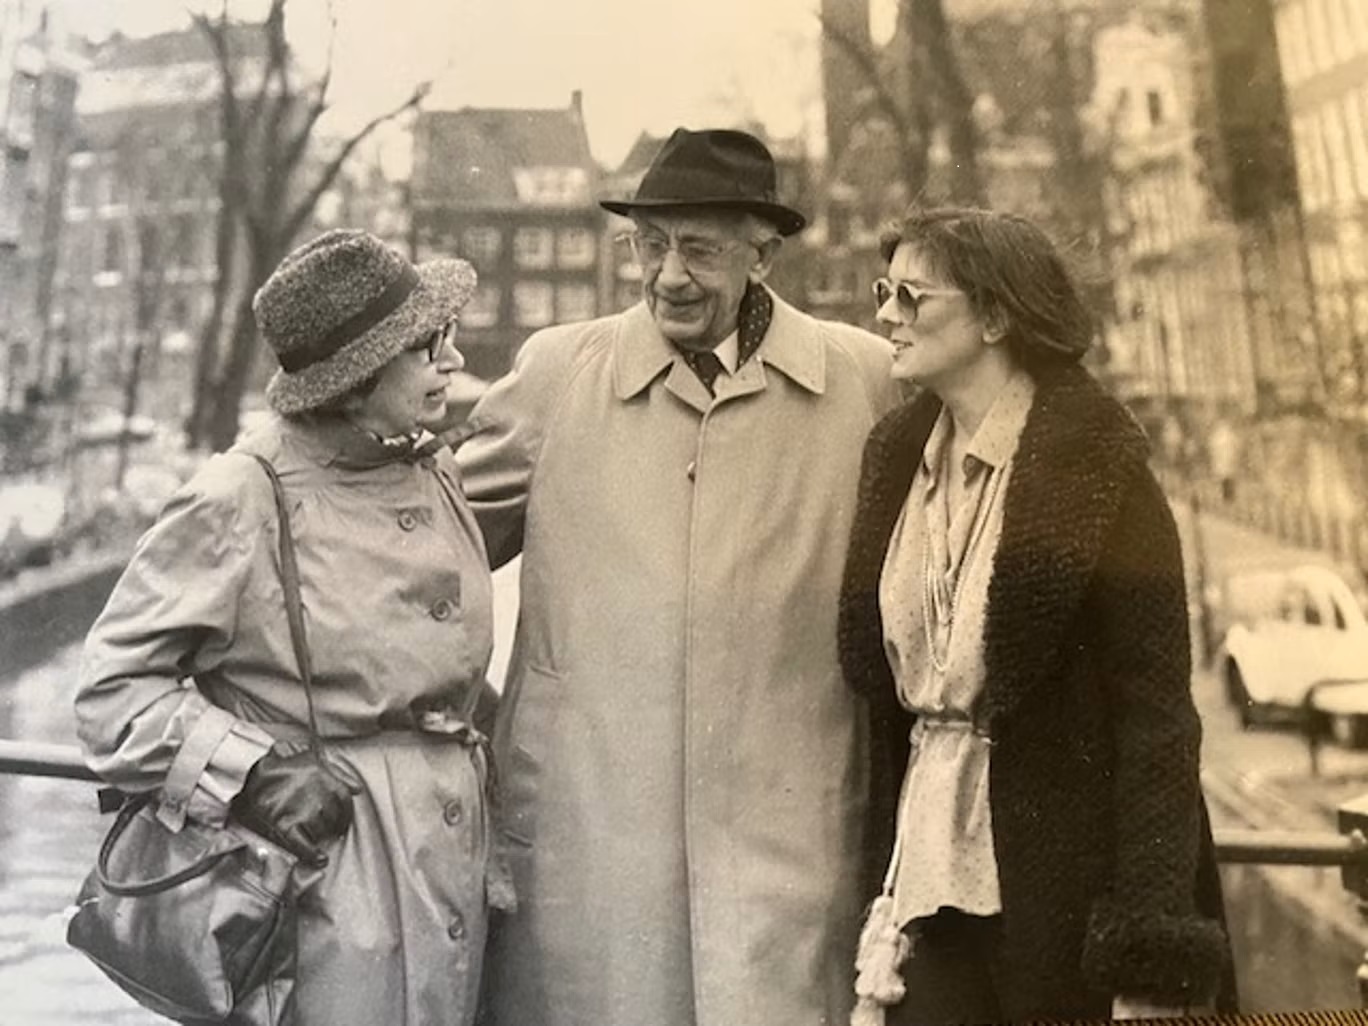 From left, Miep Gies, Jan Gies, and Alison Leslie Gold in Amsterdam. (Copyright: Alison Leslie Gold)